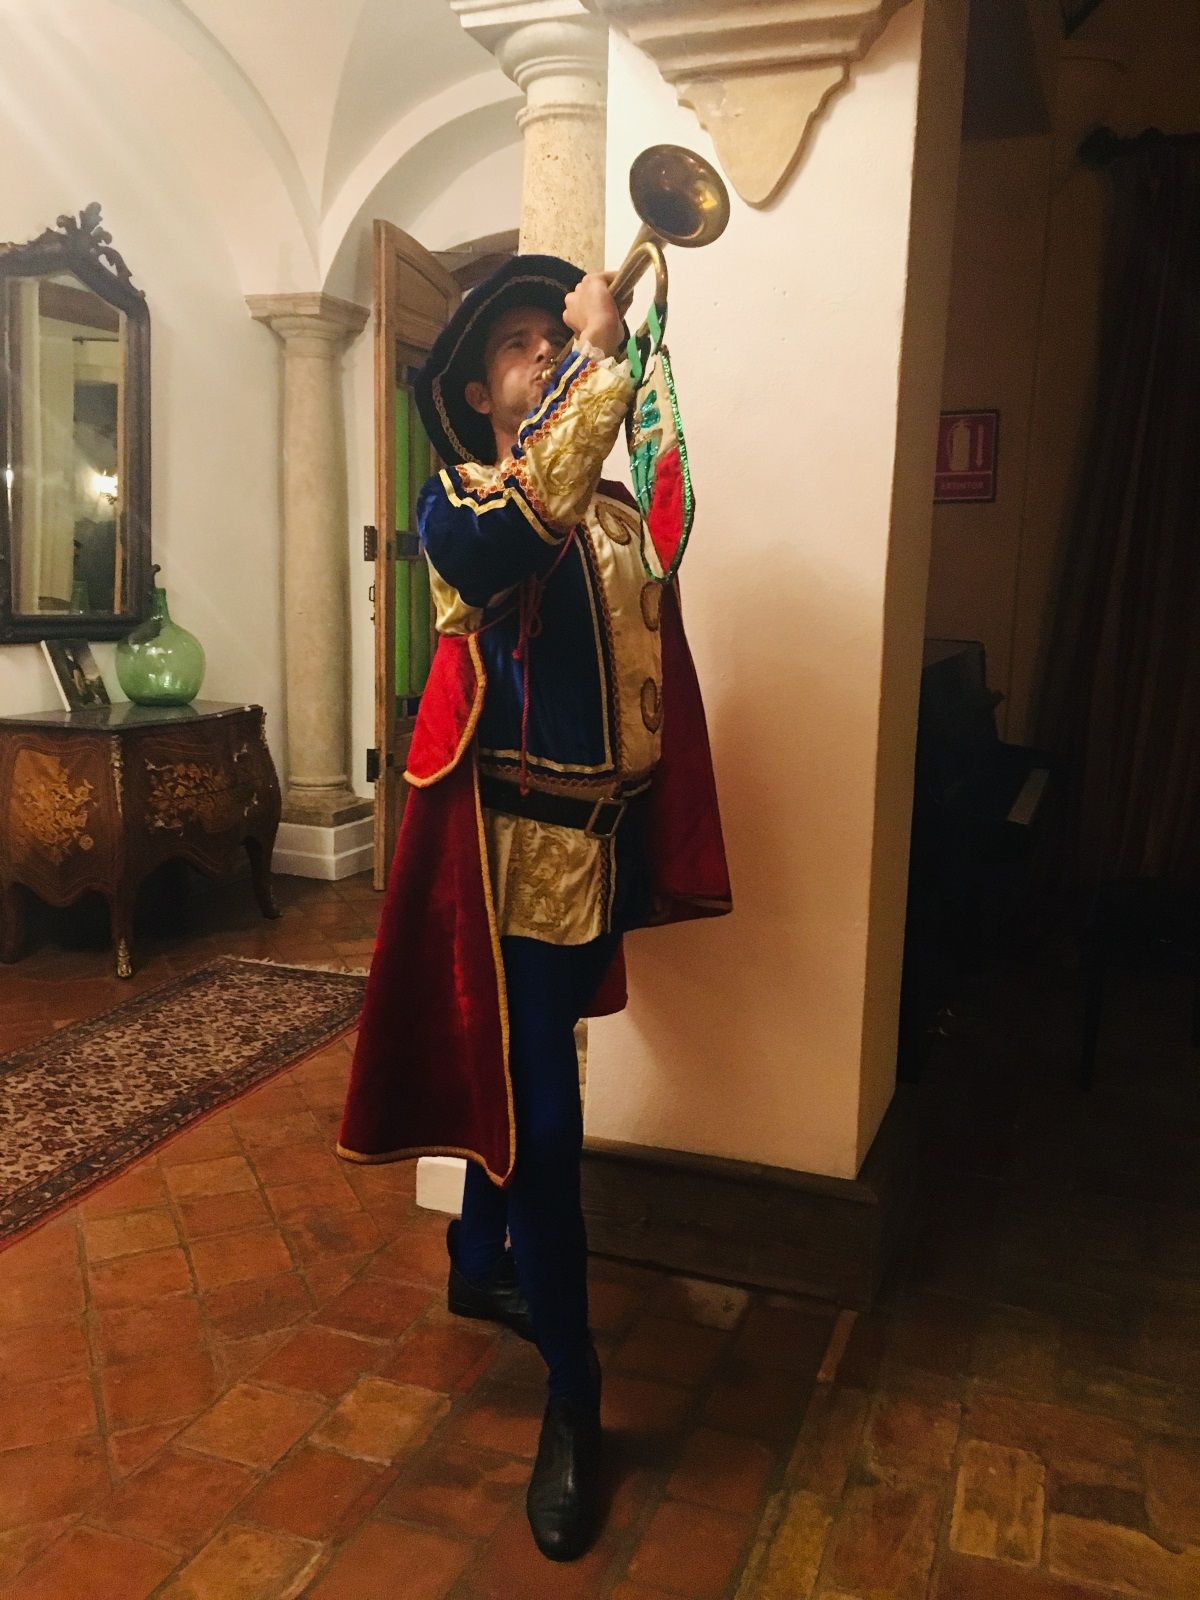  Themed private event at the Monastery of Saint Martin in Montenegral